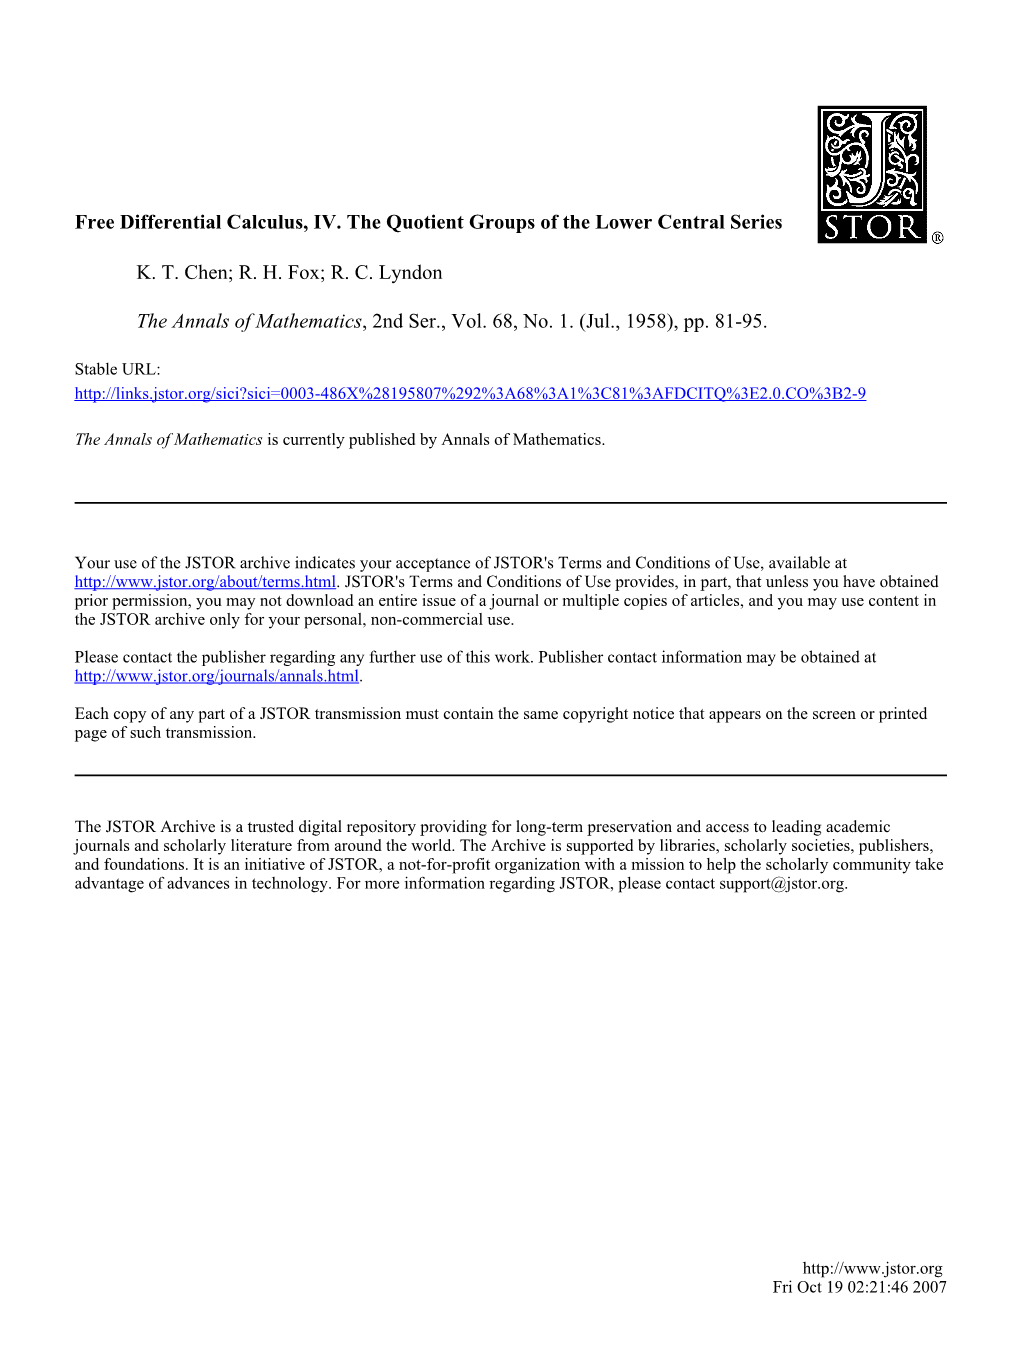 Free Differential Calculus, IV. the Quotient Groups of the Lower Central Series